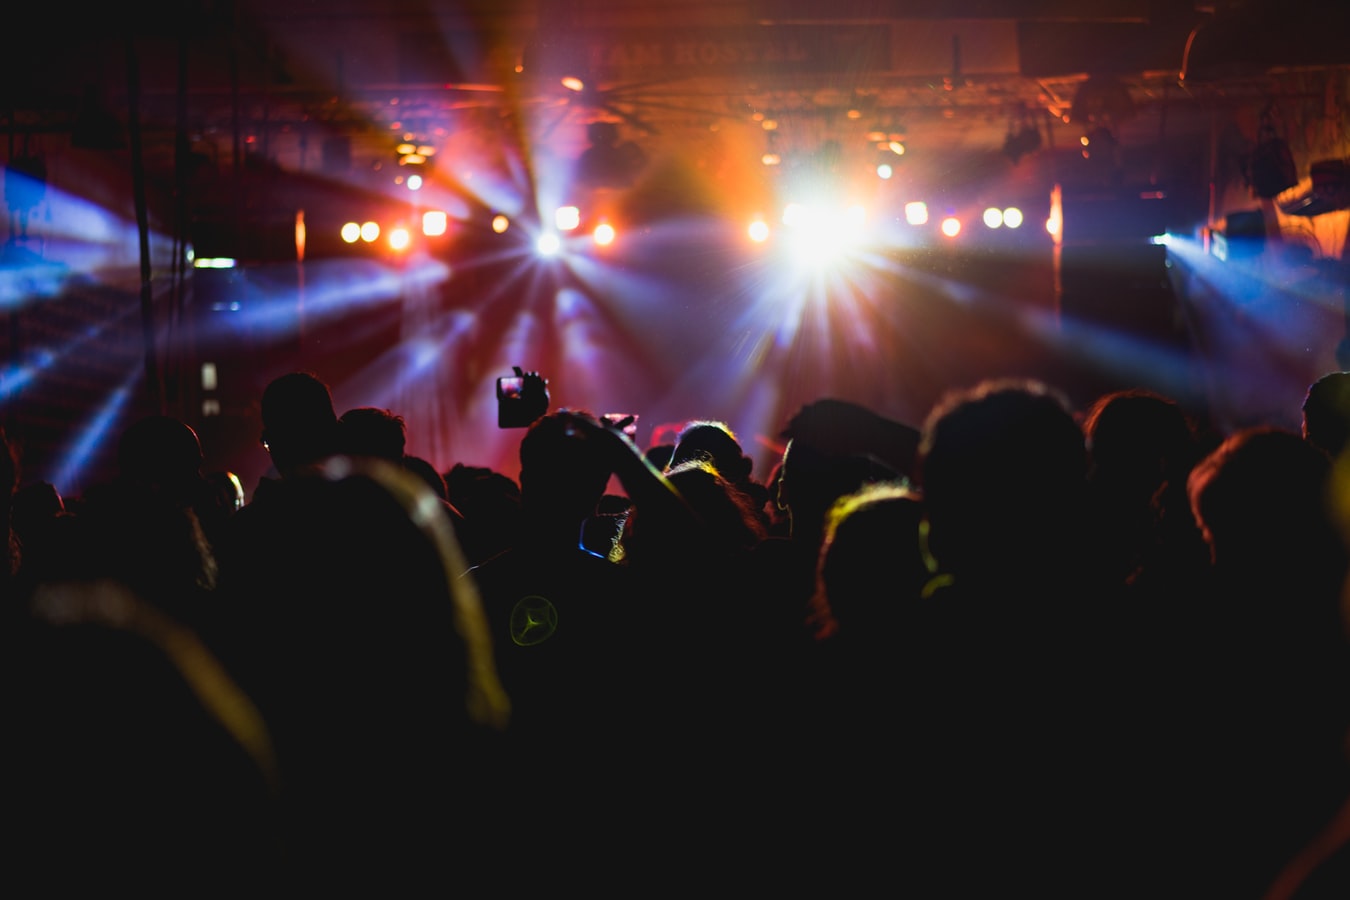 9 out of 10 independent music venues in the US may shutdown after Coronavirus